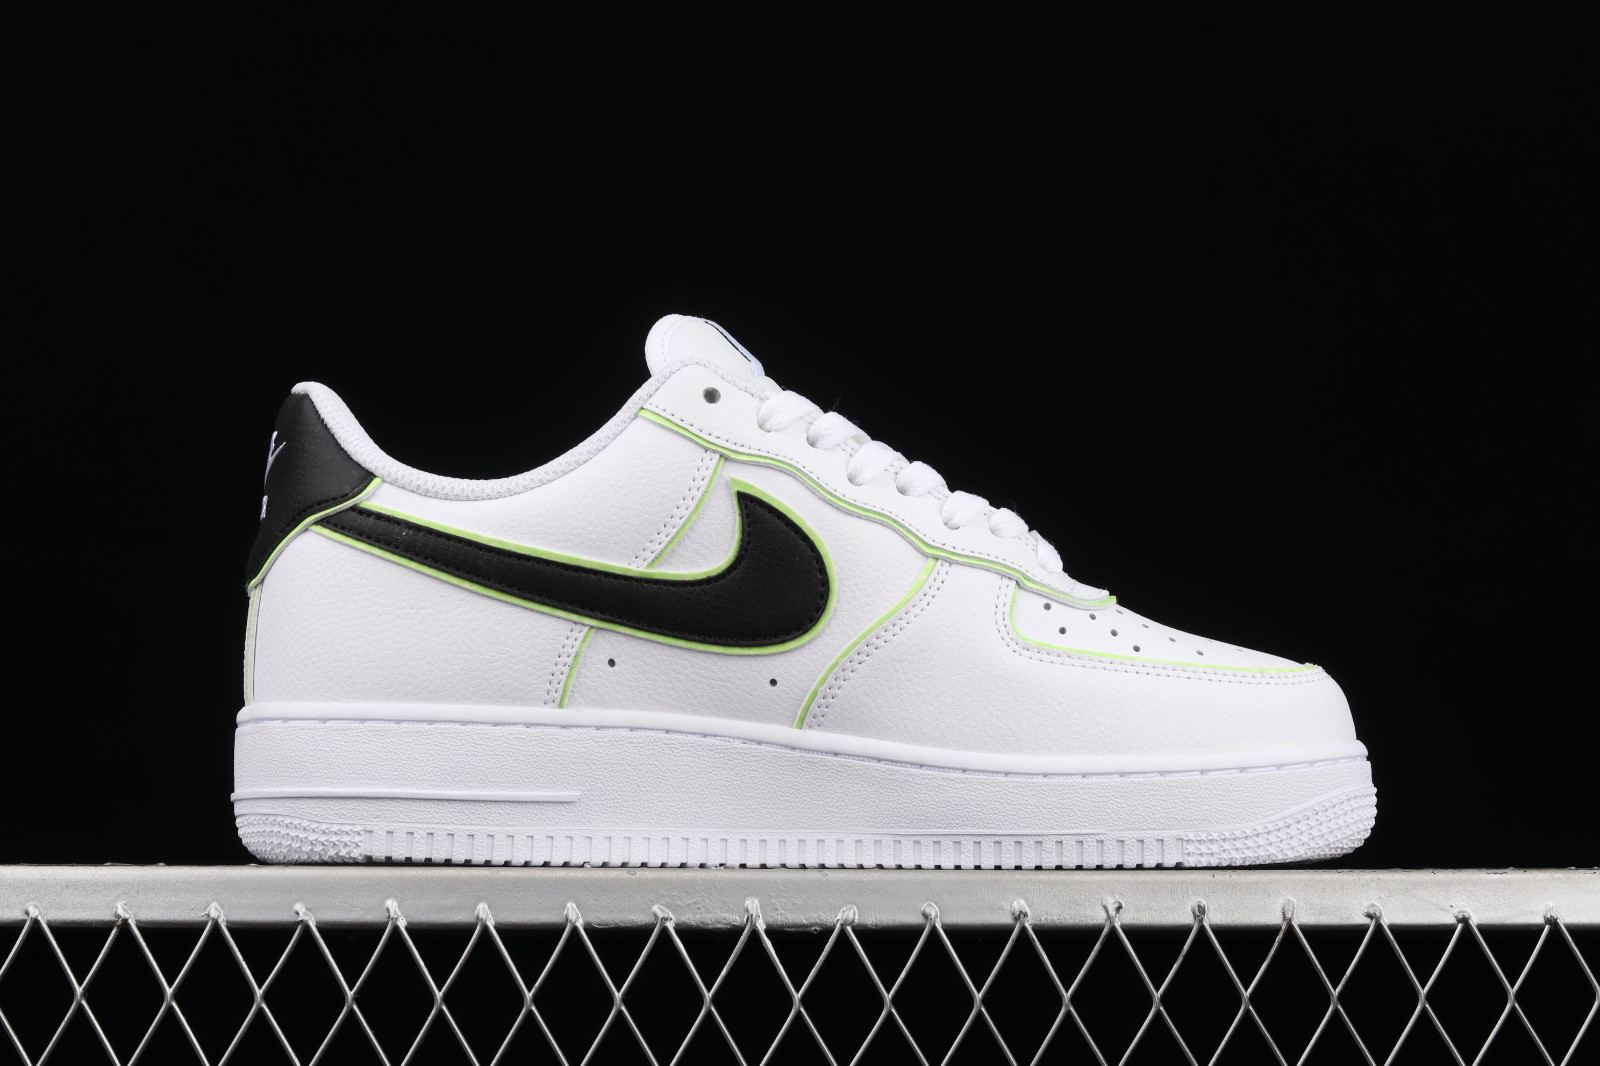 Nike Air Force 1 07 Low White Black Green Shoes CW2288 - 304 -  MultiscaleconsultingShops - kids nike air jordans white women sandals